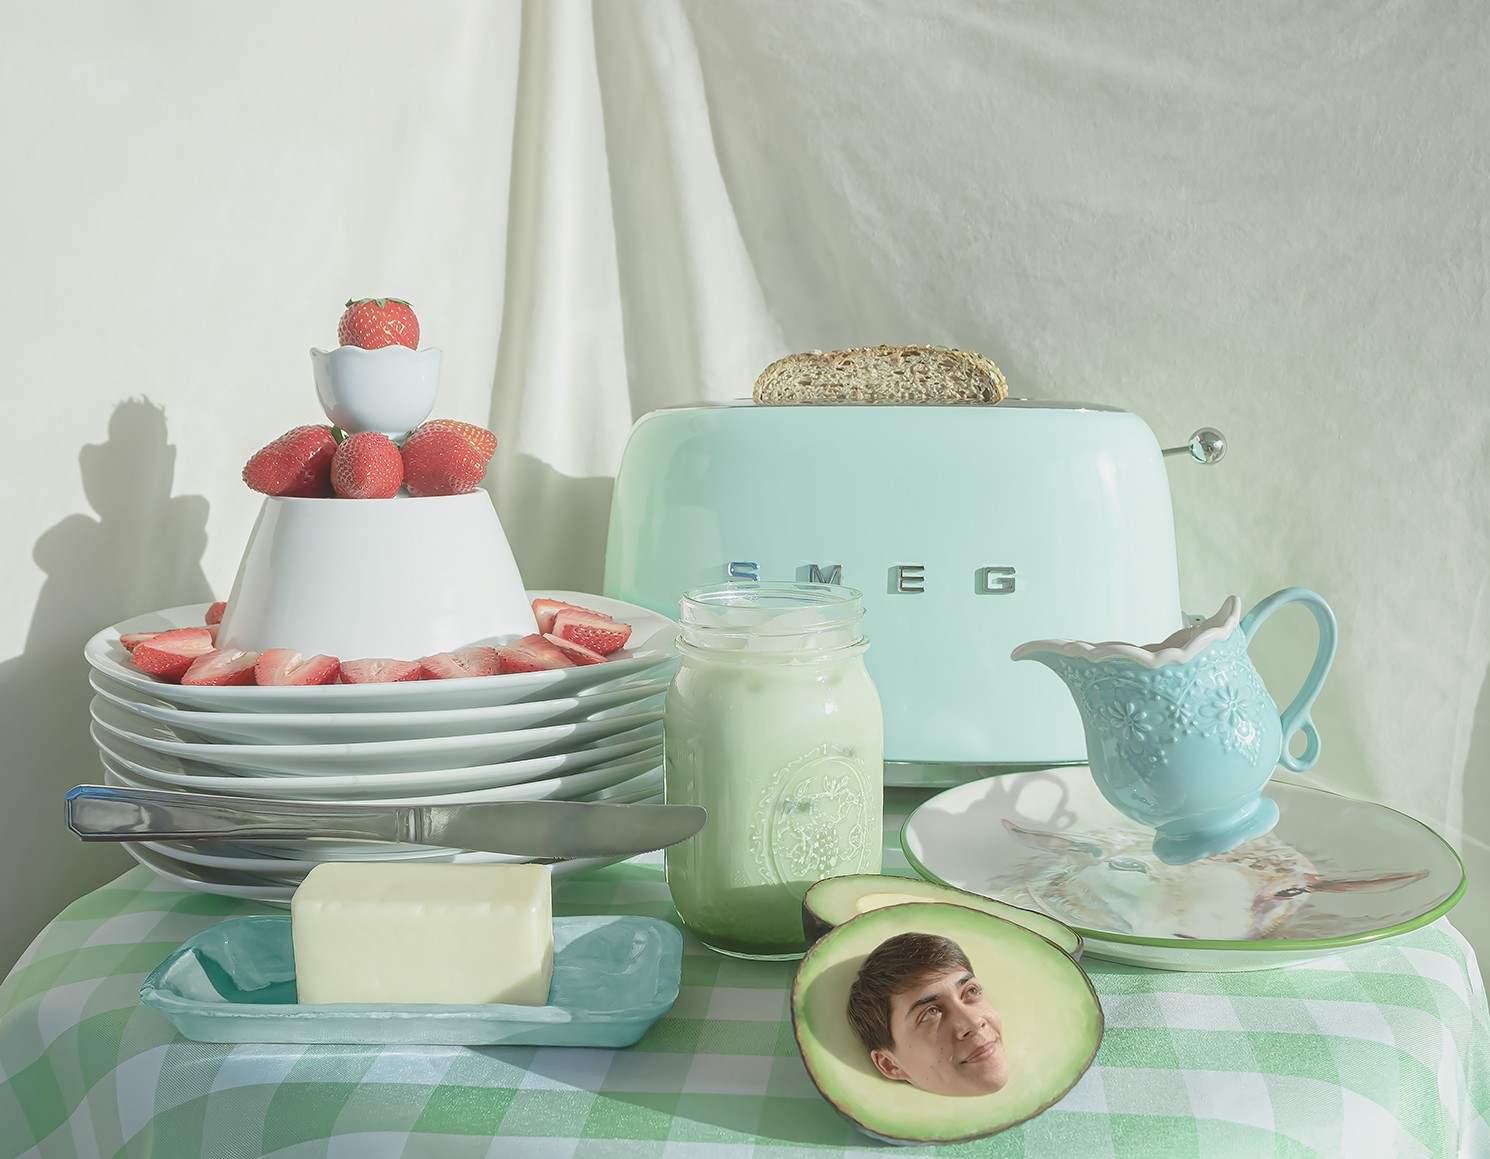 Photograph of a breakfast spread on a table with a green-and-white gingham tablecloth. On the table is a Smeg toaster with bread inside, a tower of strawberries, an iced matcha latte, a stick of butter with a floating knife, a floating tea cup, and an avocado with a boy's head as the seed. A beige fabric backdrop is behind the table.